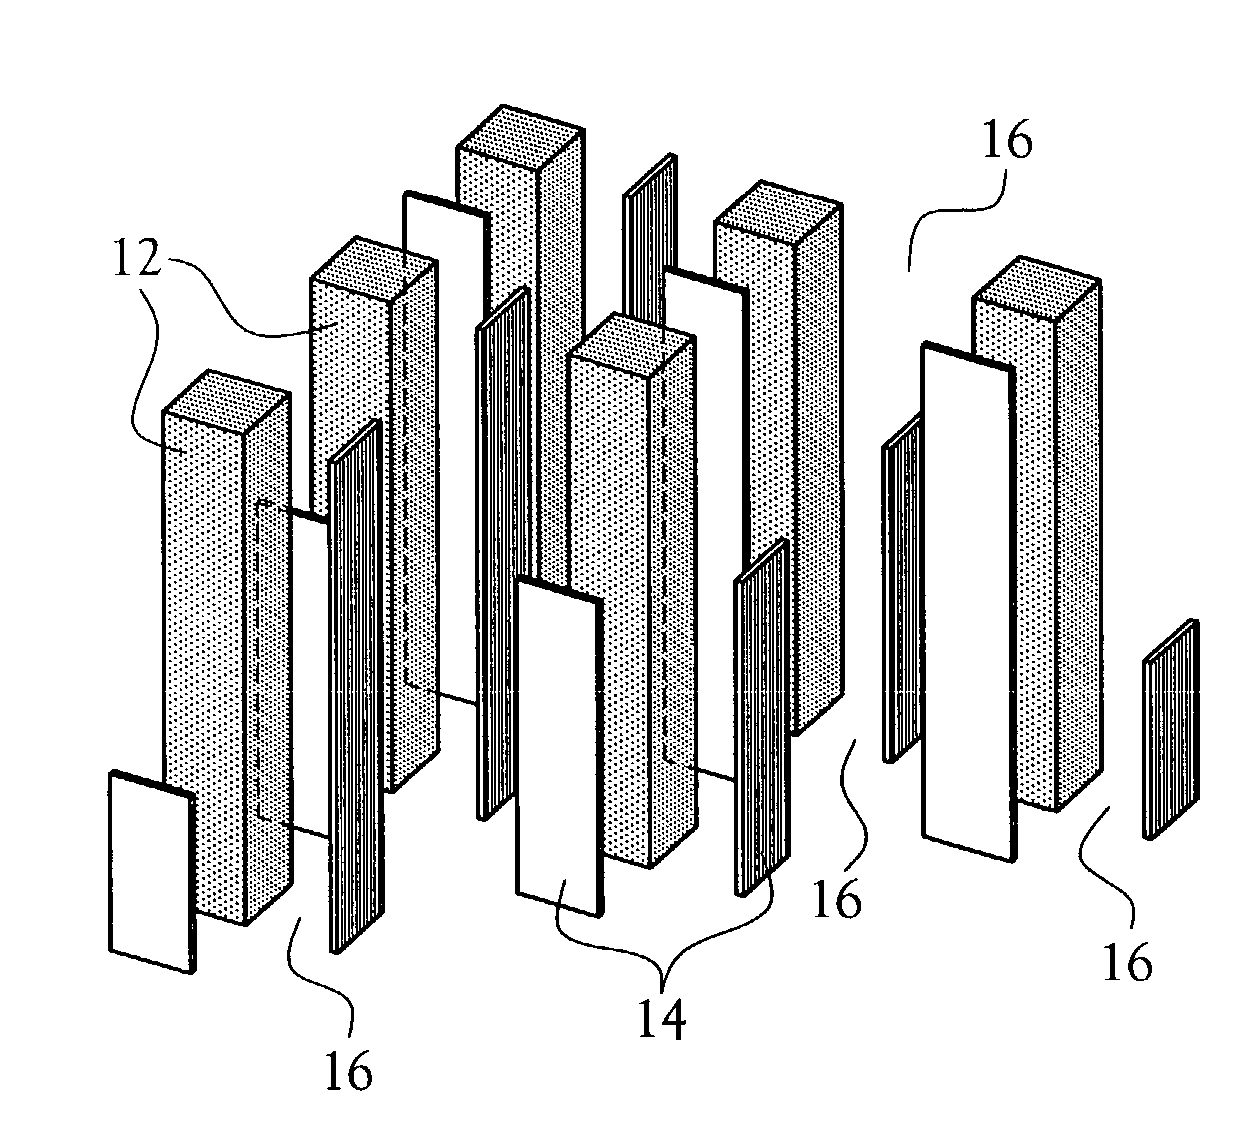 Detector array using internalized light sharing and air coupling